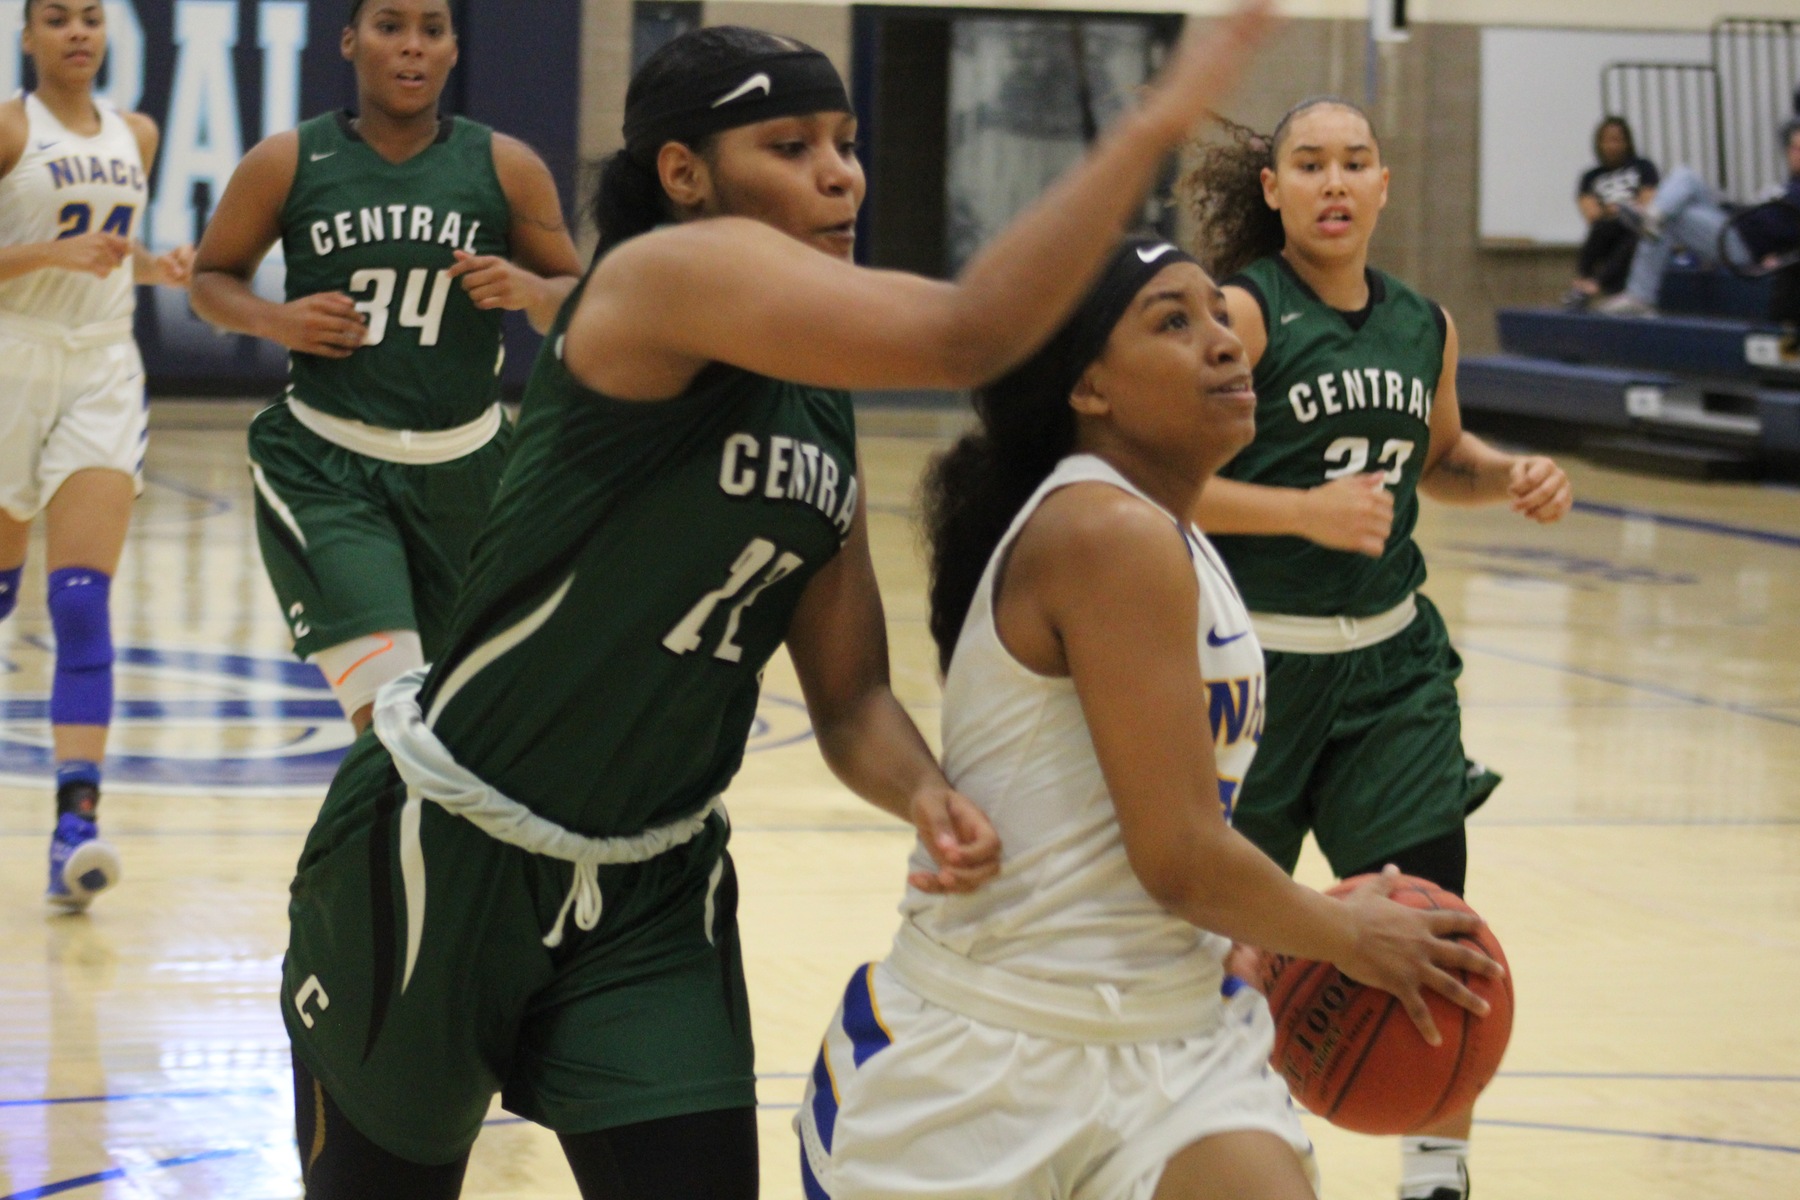 Sierra Lynch converts a layup in the first half of Friday's game against Central CC.